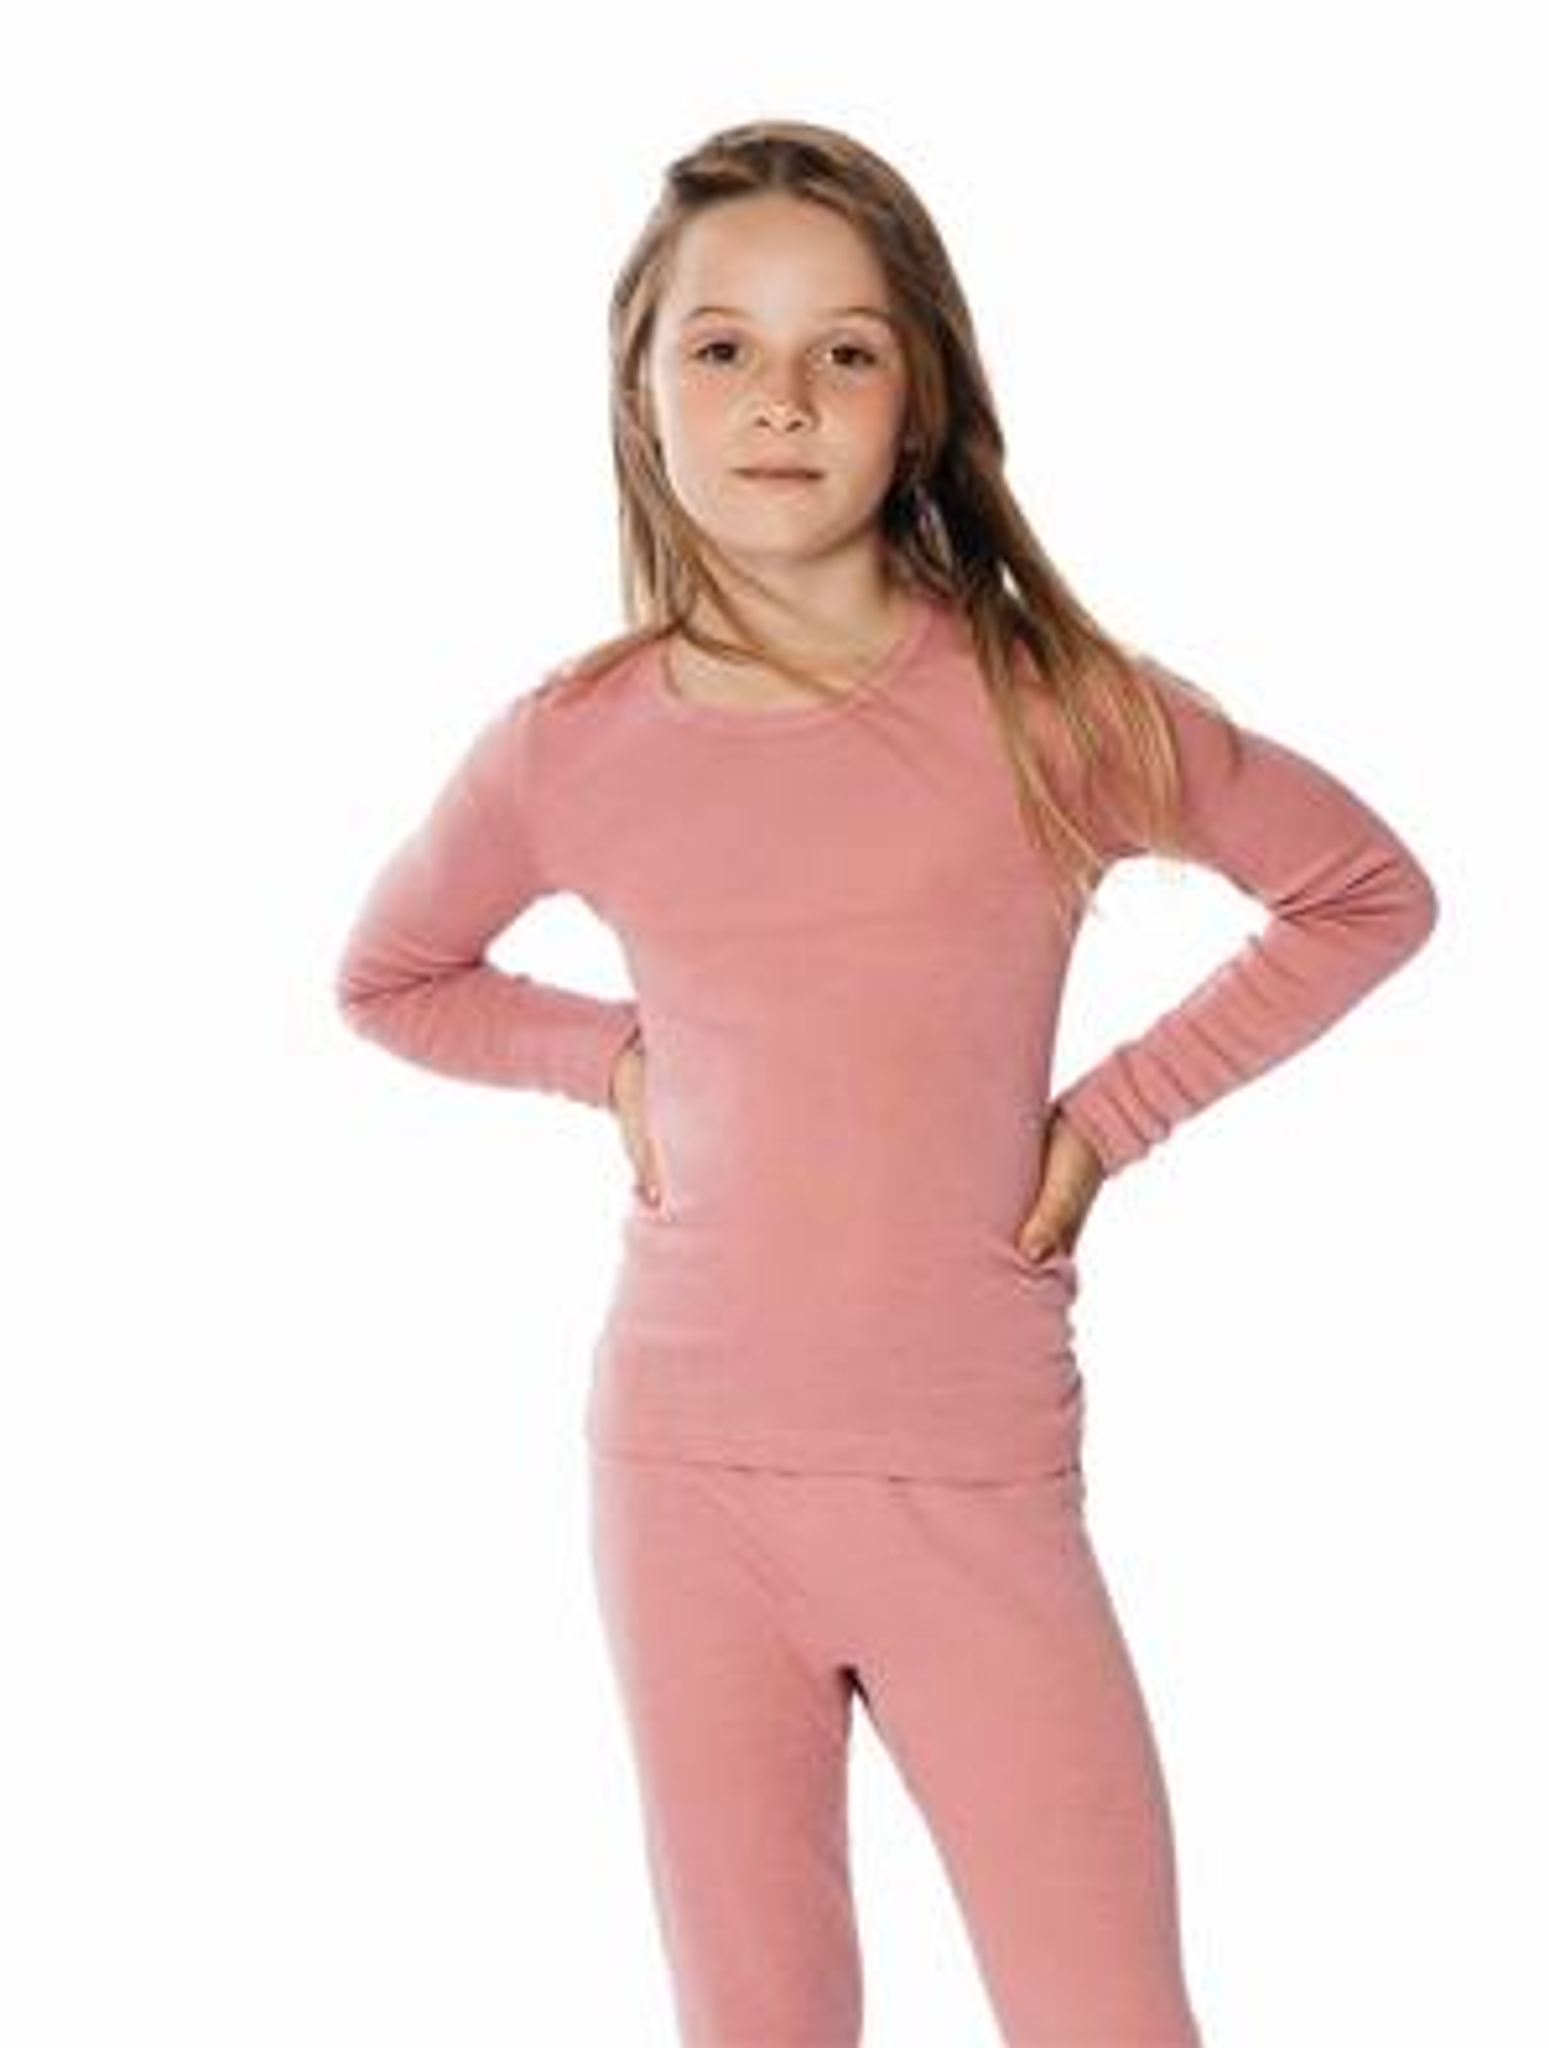 New Girls 10-11 Years Clothes Lovely Long Sleeves Thermal Vest Top